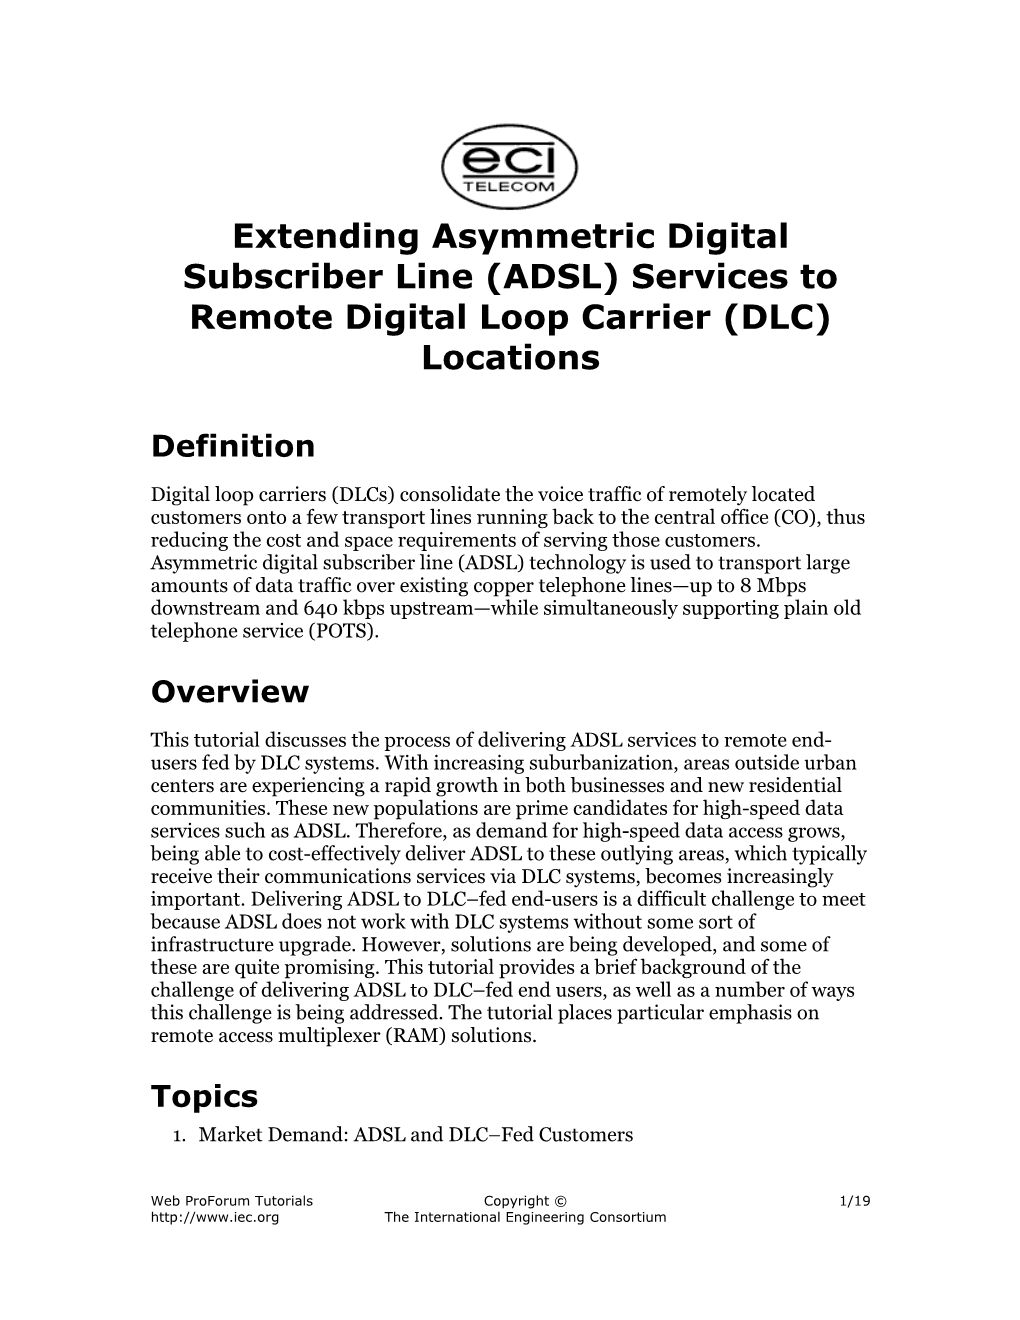 ADSL) Services to Remote Digital Loop Carrier (DLC) Locations